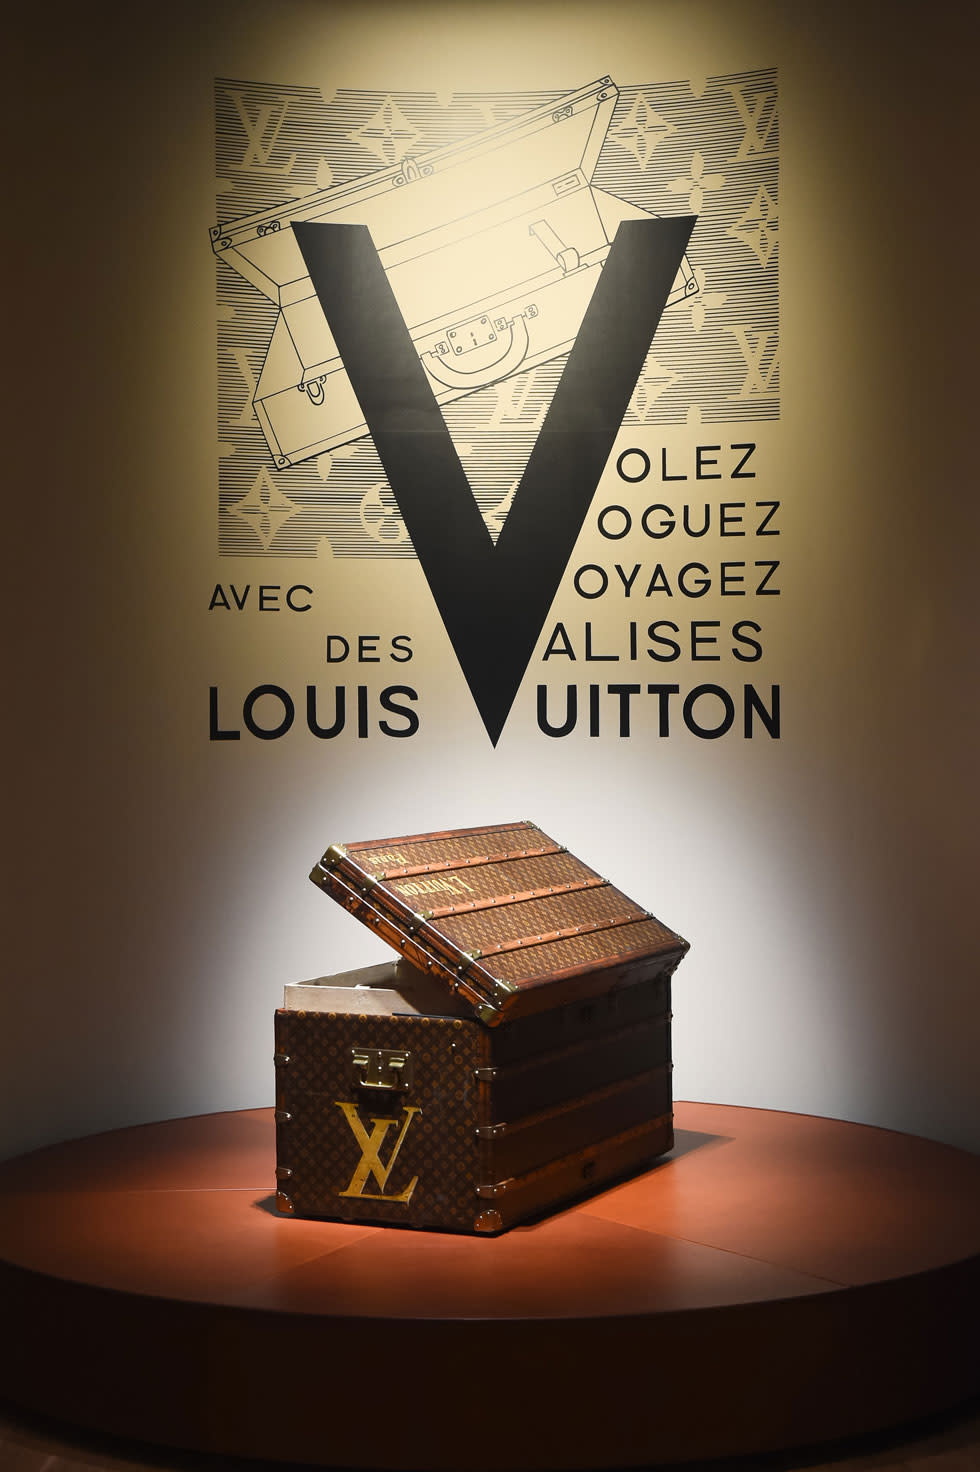 Louis Vuitton - I would like to invite you all to see the Louis